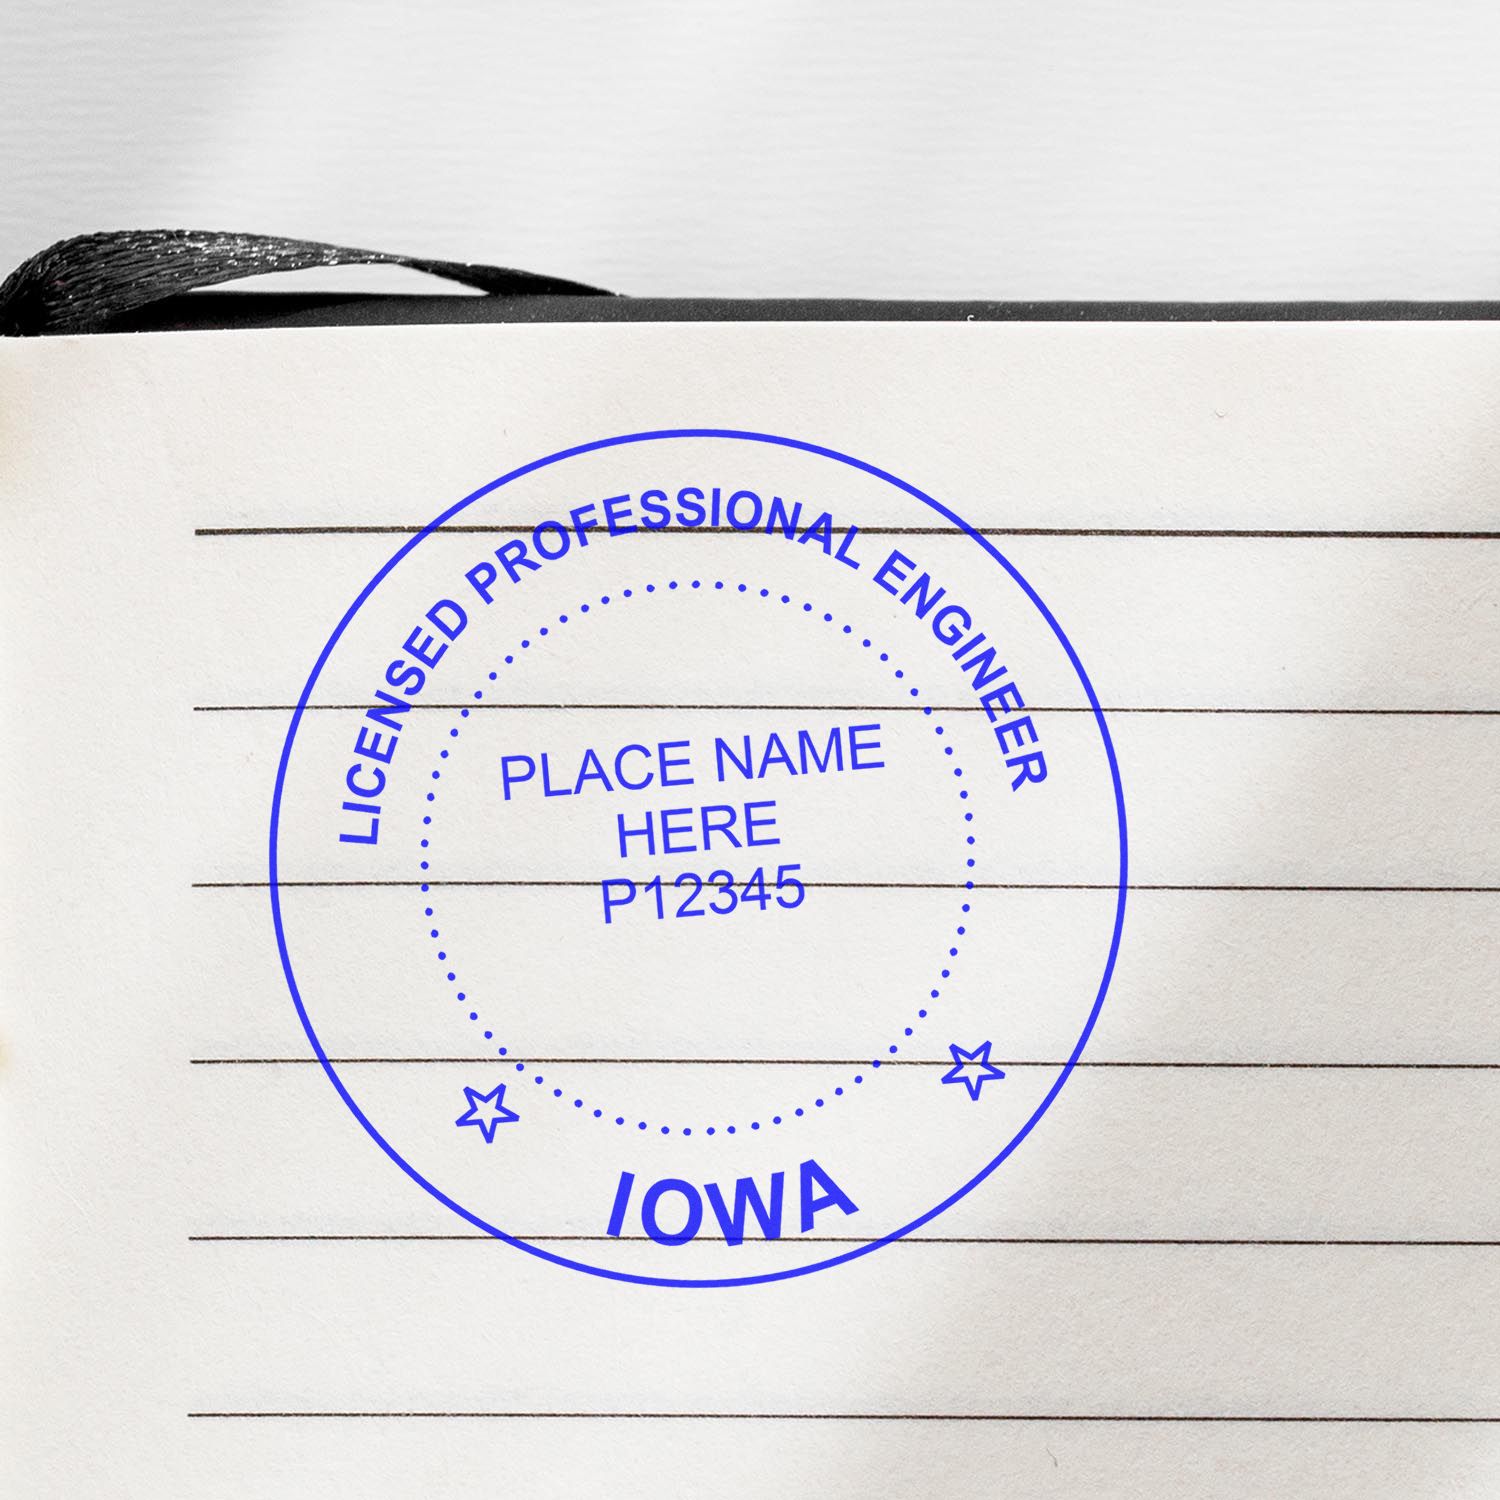 The Digital Iowa PE Stamp and Electronic Seal for Iowa Engineer stamp impression comes to life with a crisp, detailed photo on paper - showcasing true professional quality.